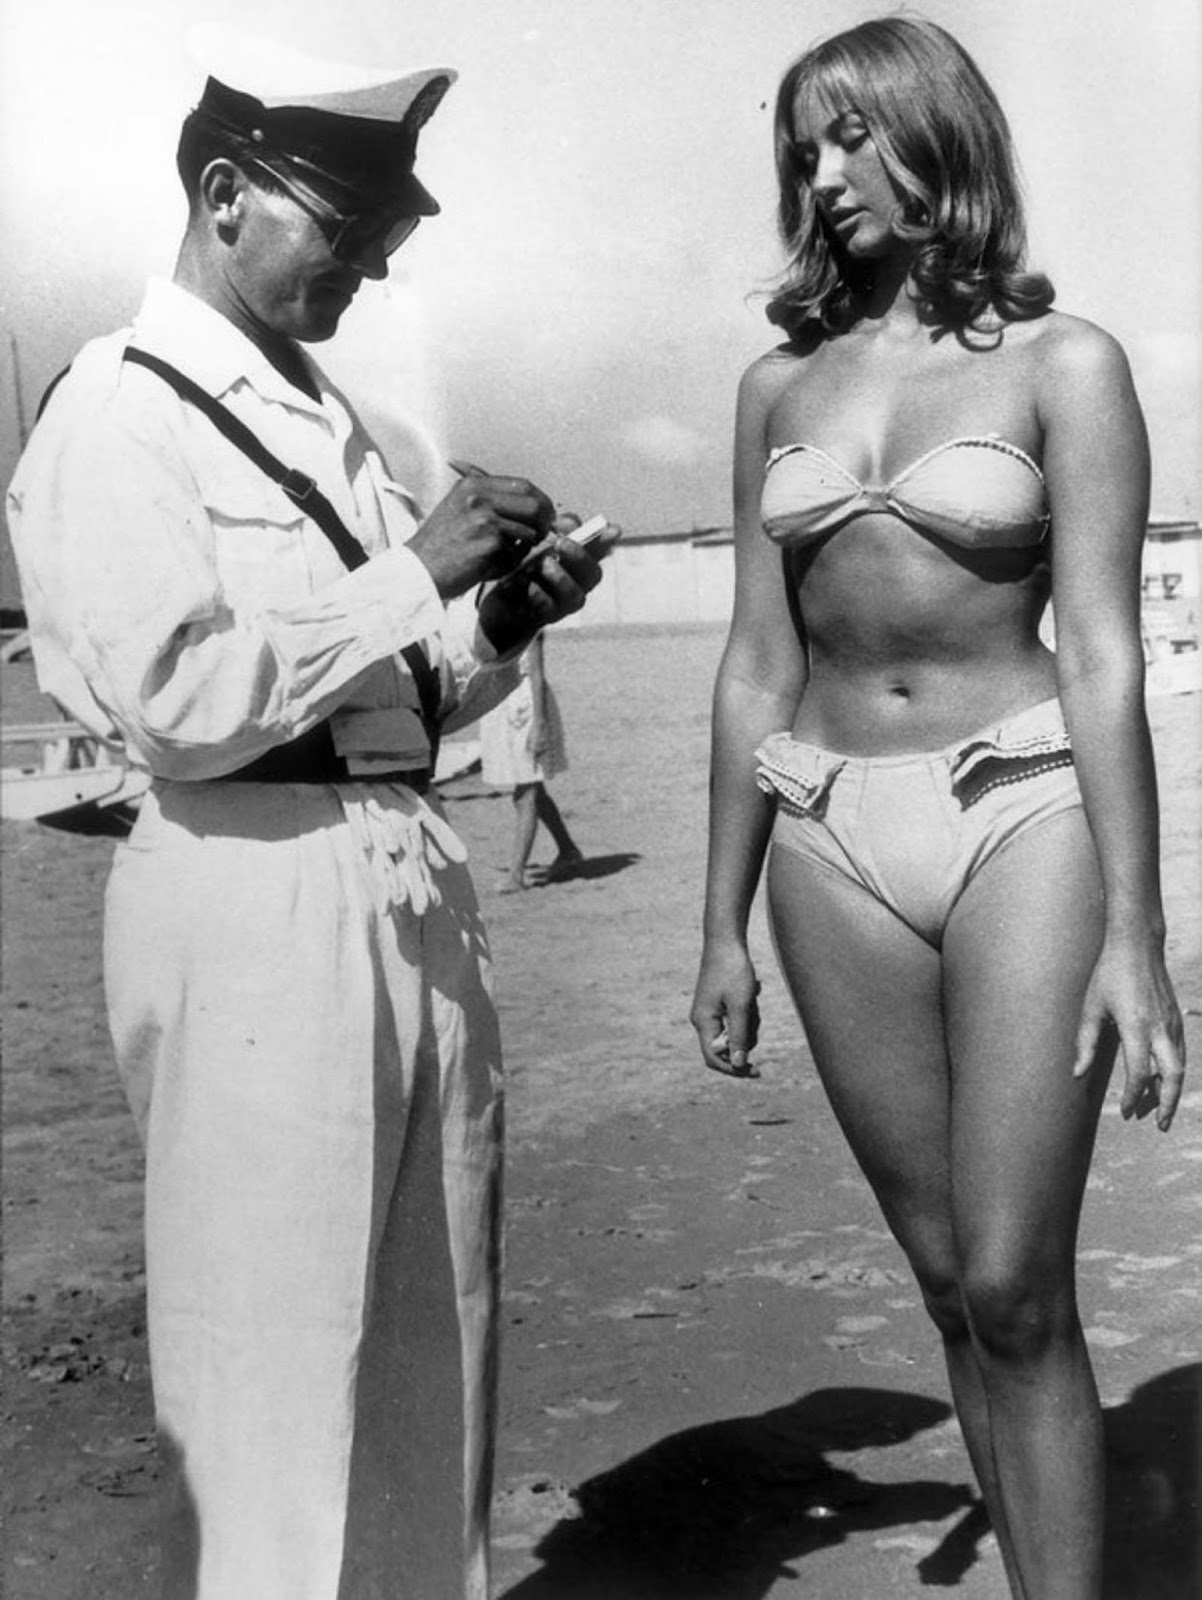 A police officer issuing a woman a ticket for wearing a bikini on an Italian beach, 1957.jpg